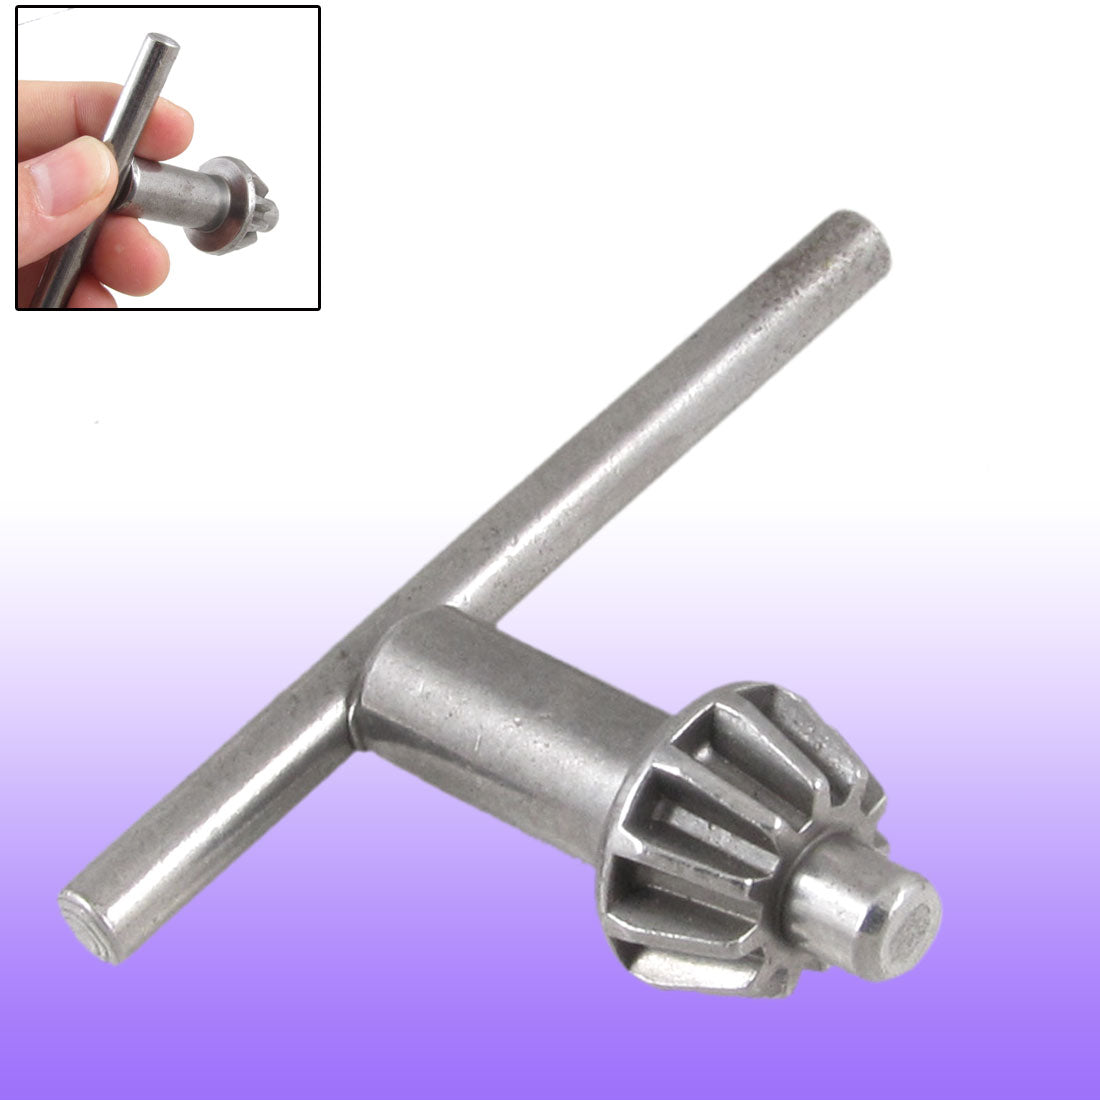 uxcell Uxcell Drill Chuck Key 8mm Pilot 21.5mm Gear for Impact Driver Drills Tools Wrench